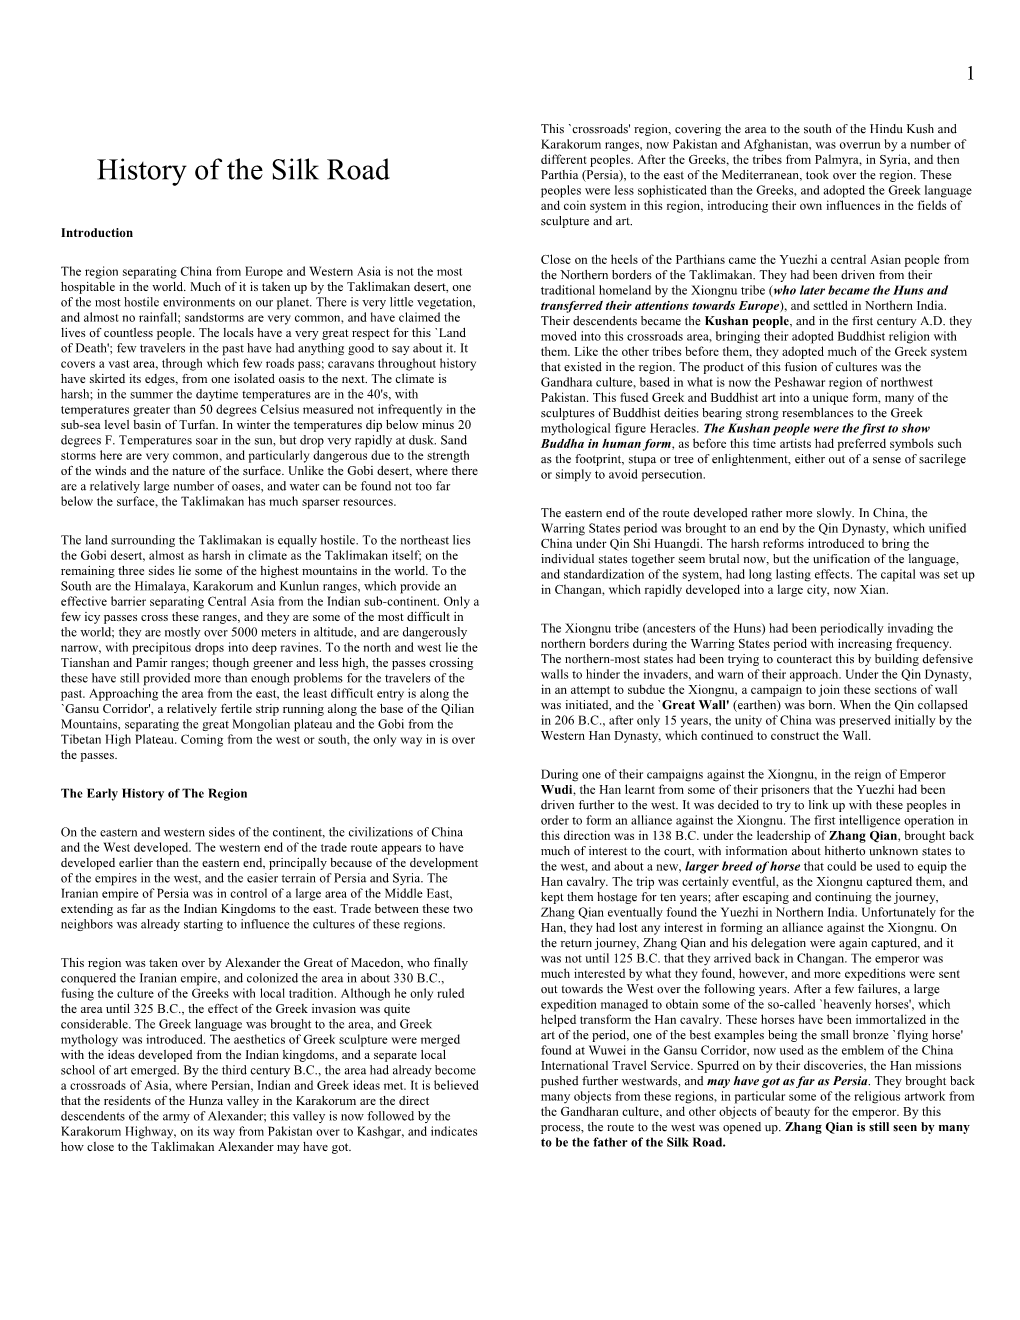 Complete History of the Silk Road